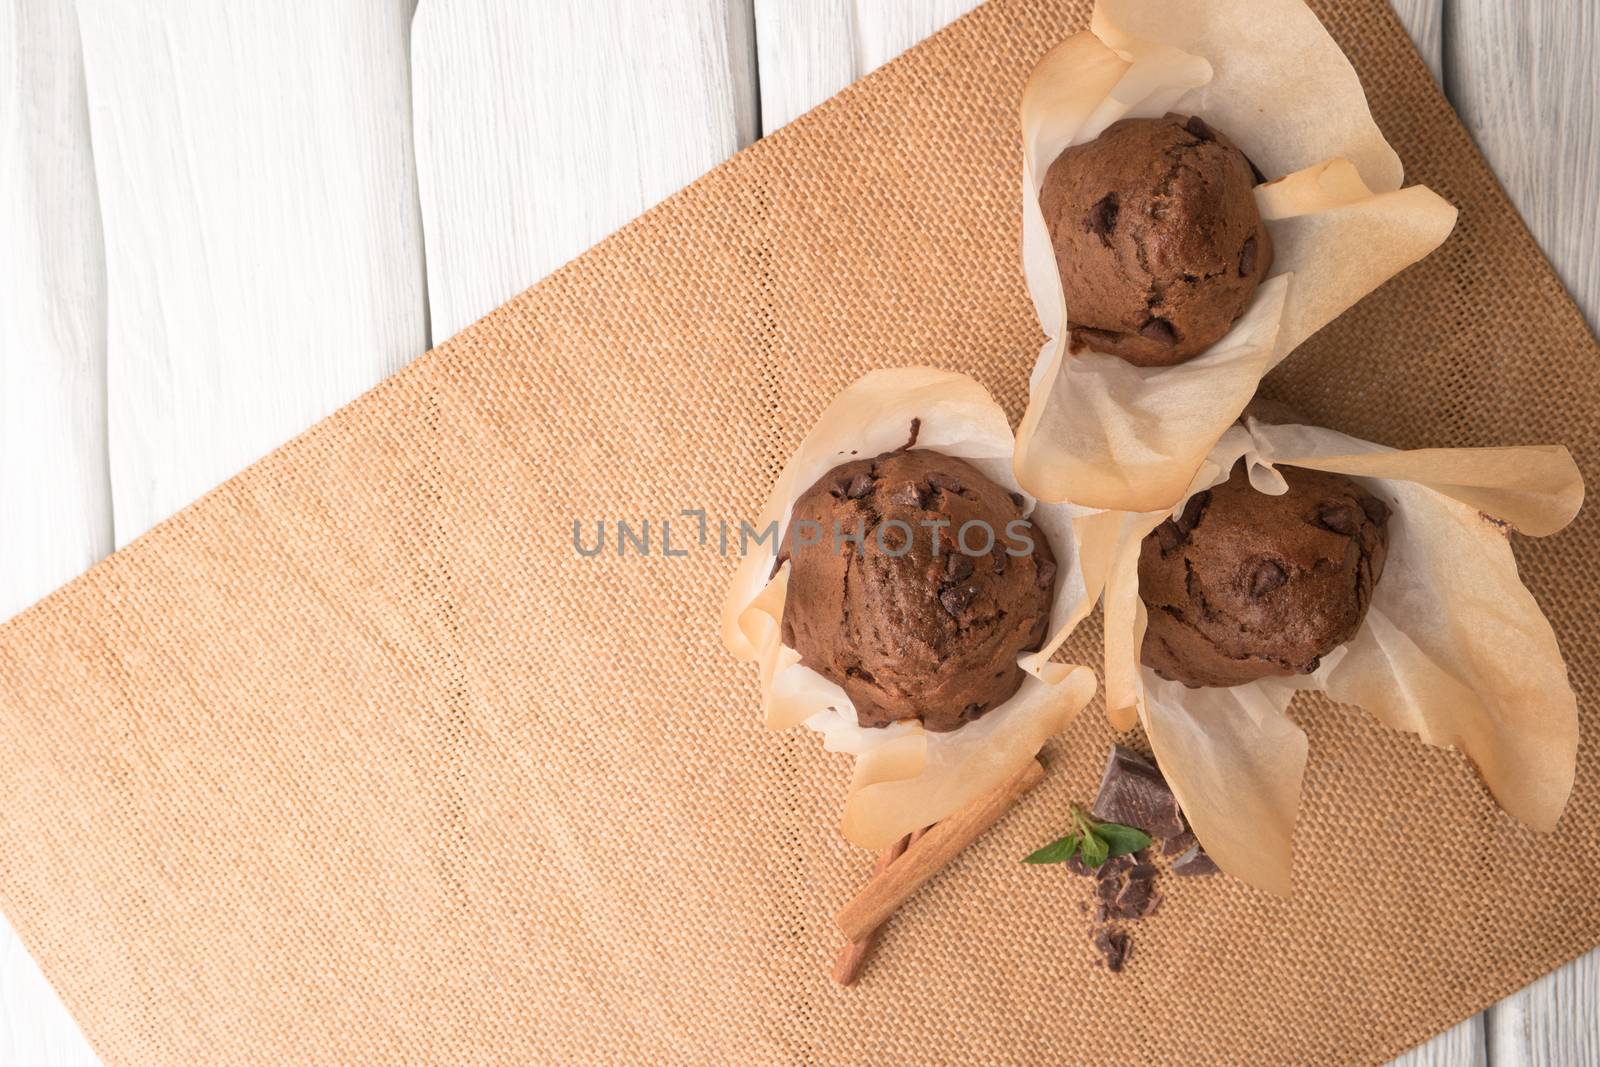 Chocolate muffins with chocolate slices in basket, cinnamom sticks and mint on placemat